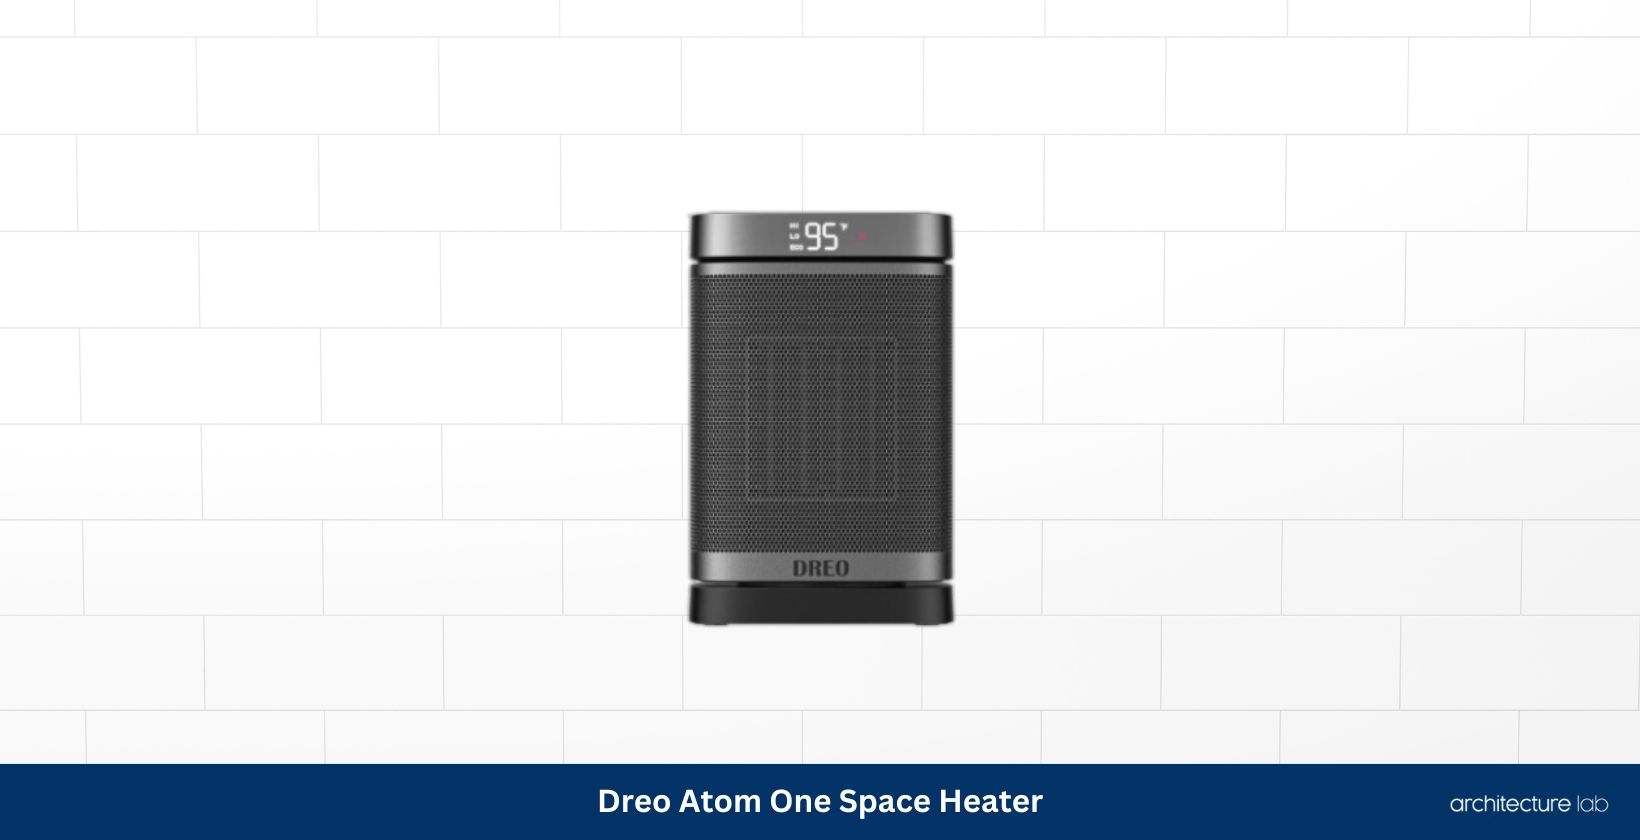 Dreo atom one space heater dr hsh004